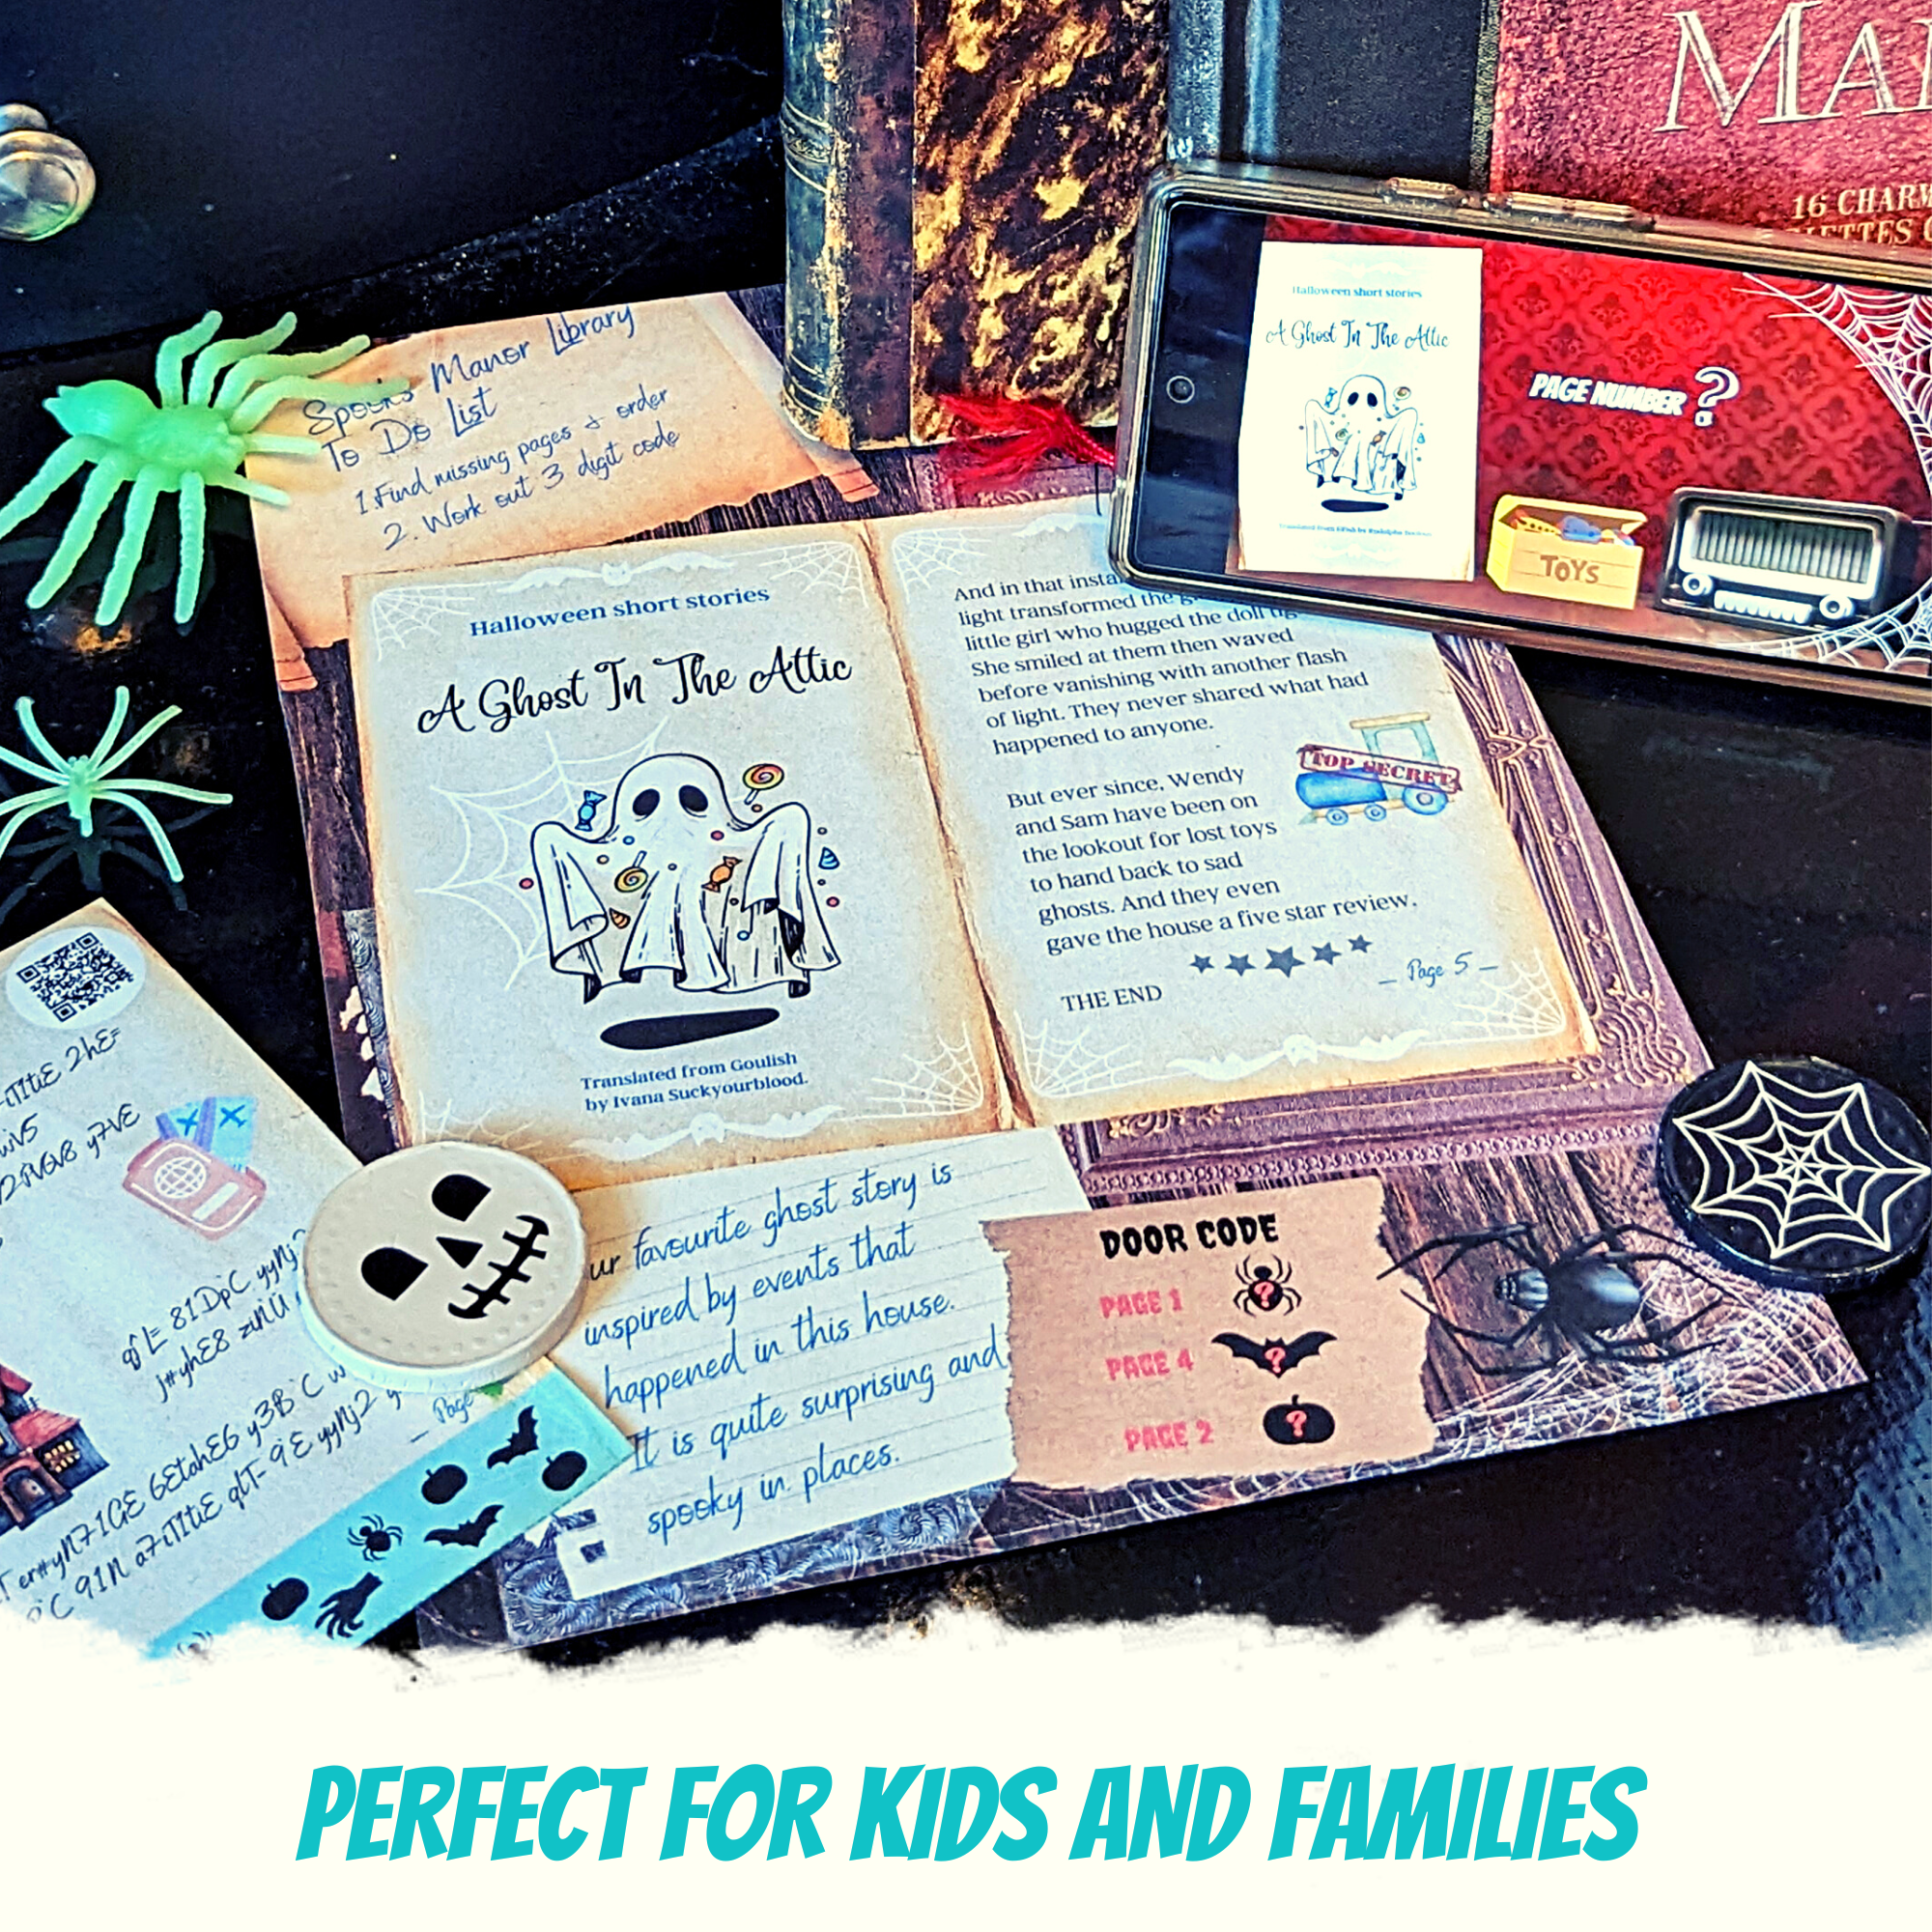 Escape Room Game kit for kids perfect for children birthday parties : Great Halloween Escape. Home family spooky trick or treat activity - book puzzle